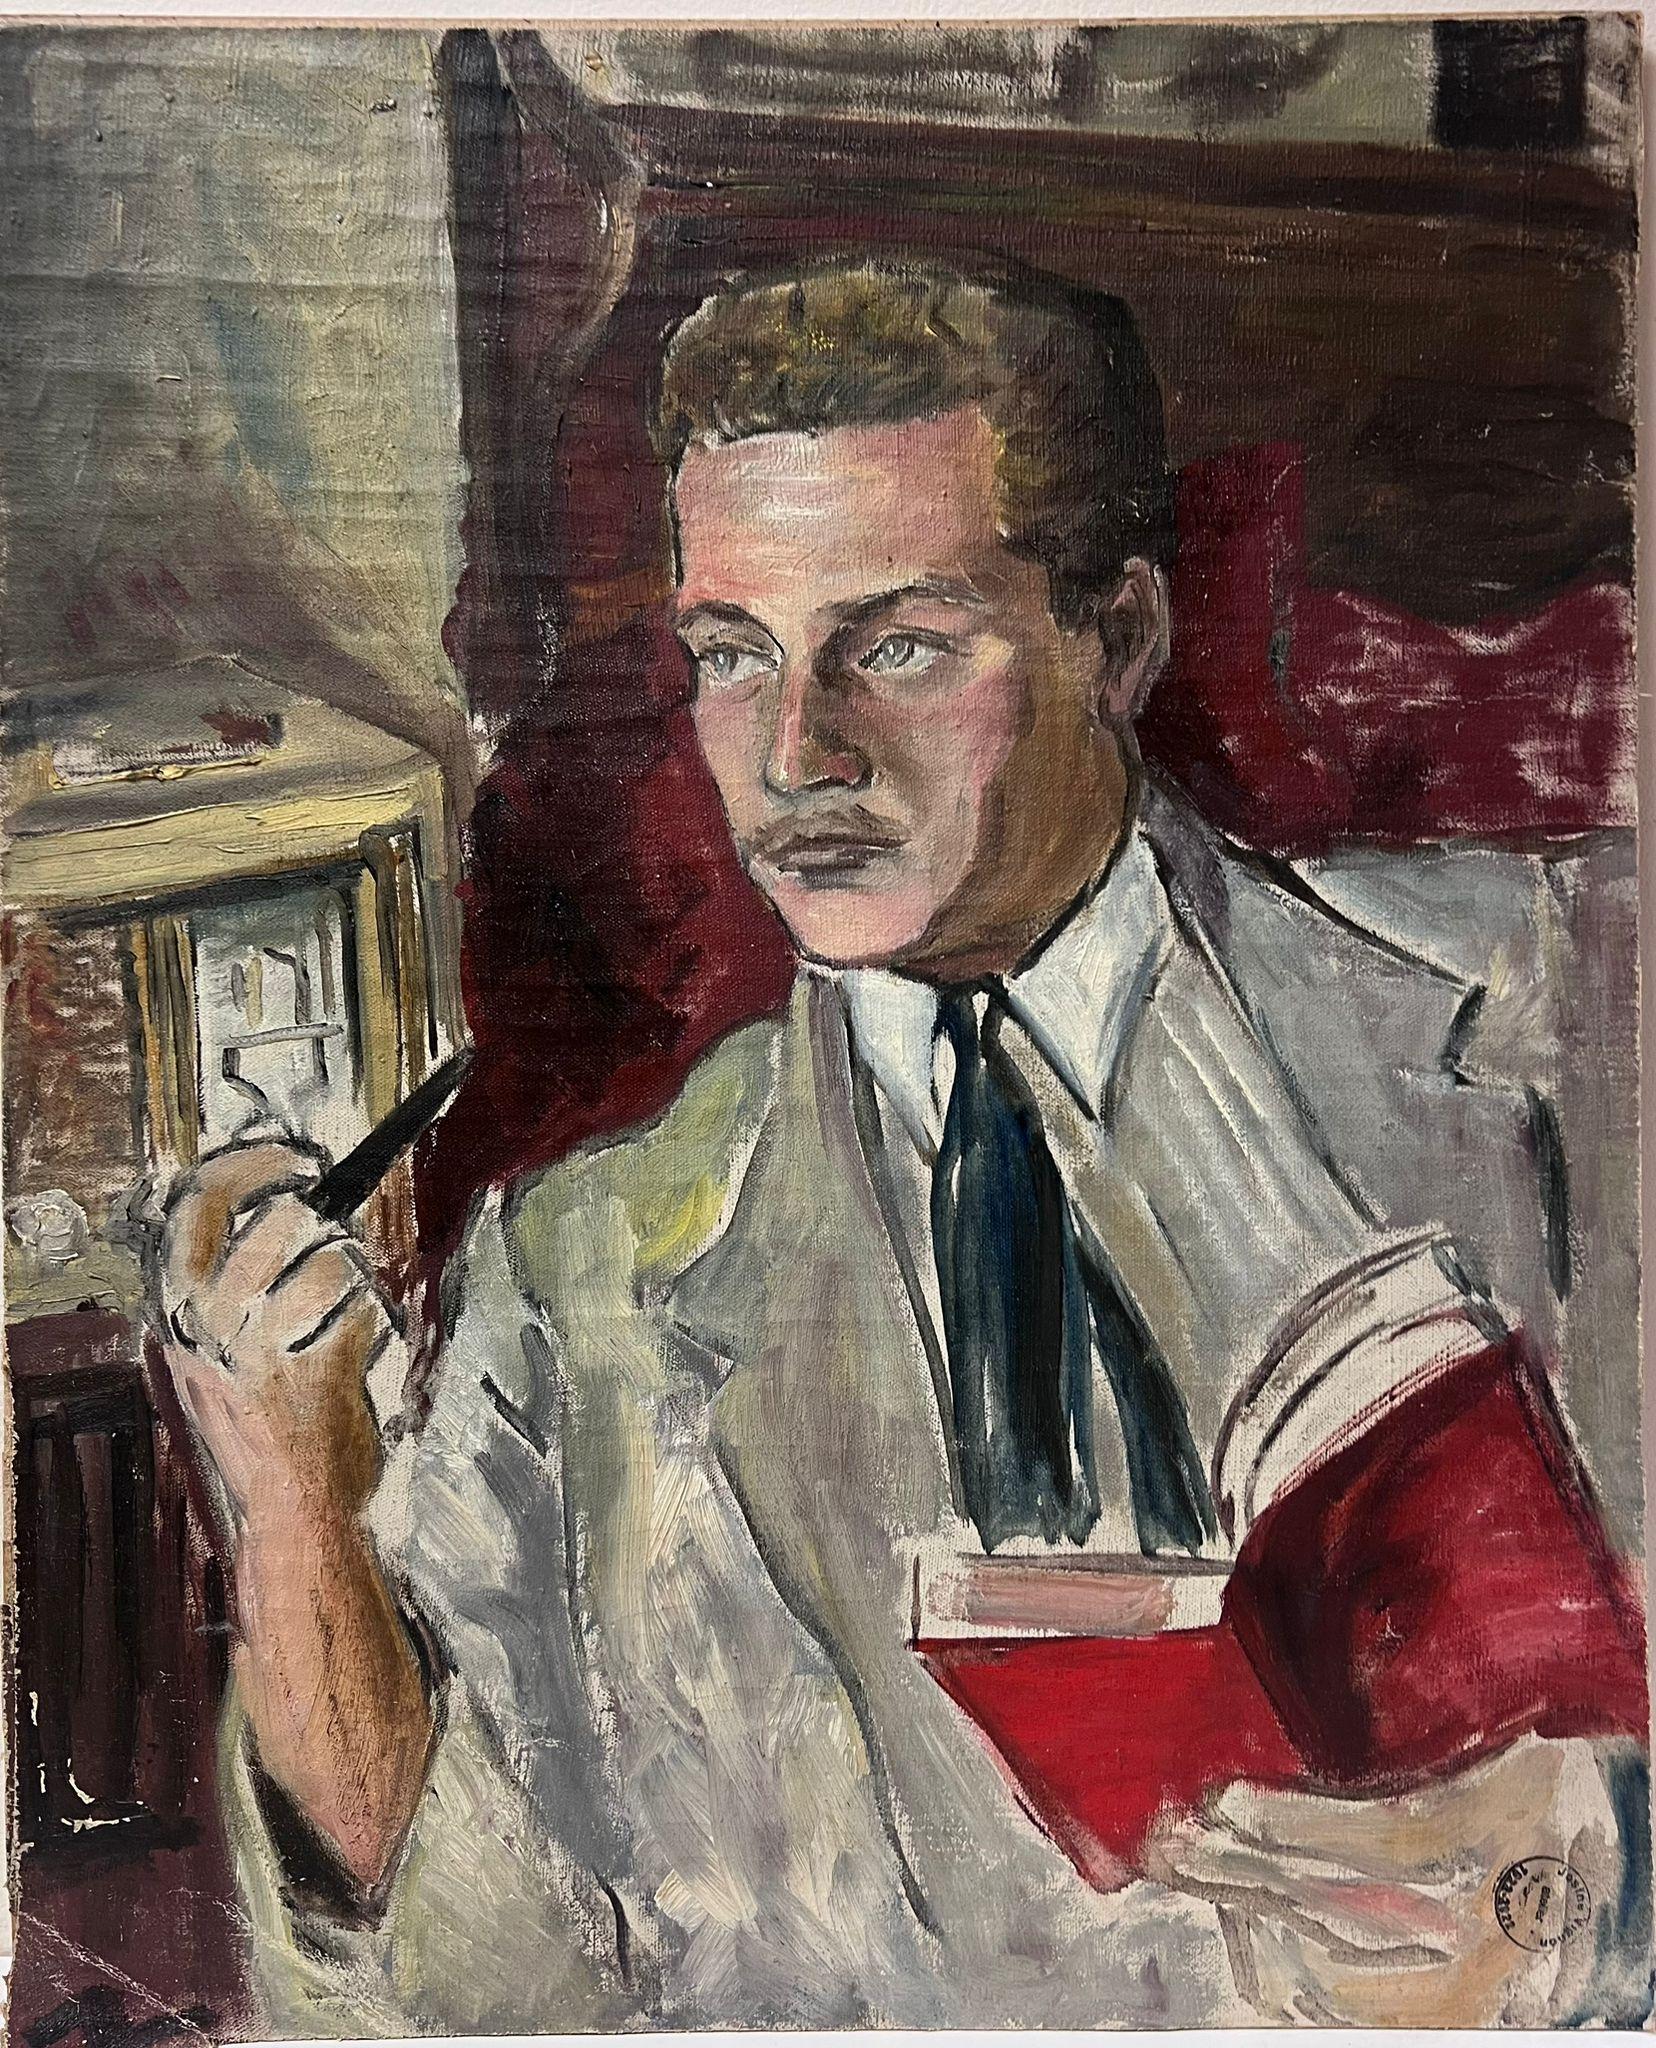 Man Smoking Pipe
by Josine Vignon (French 1922-2022) 
oil painting on board, unframed
board: 24 x 19.5 inches
stamped verso
very good condition 
provenance: from the artists estate, France

Josine Vignon (1922-2022) was a French artist living on the